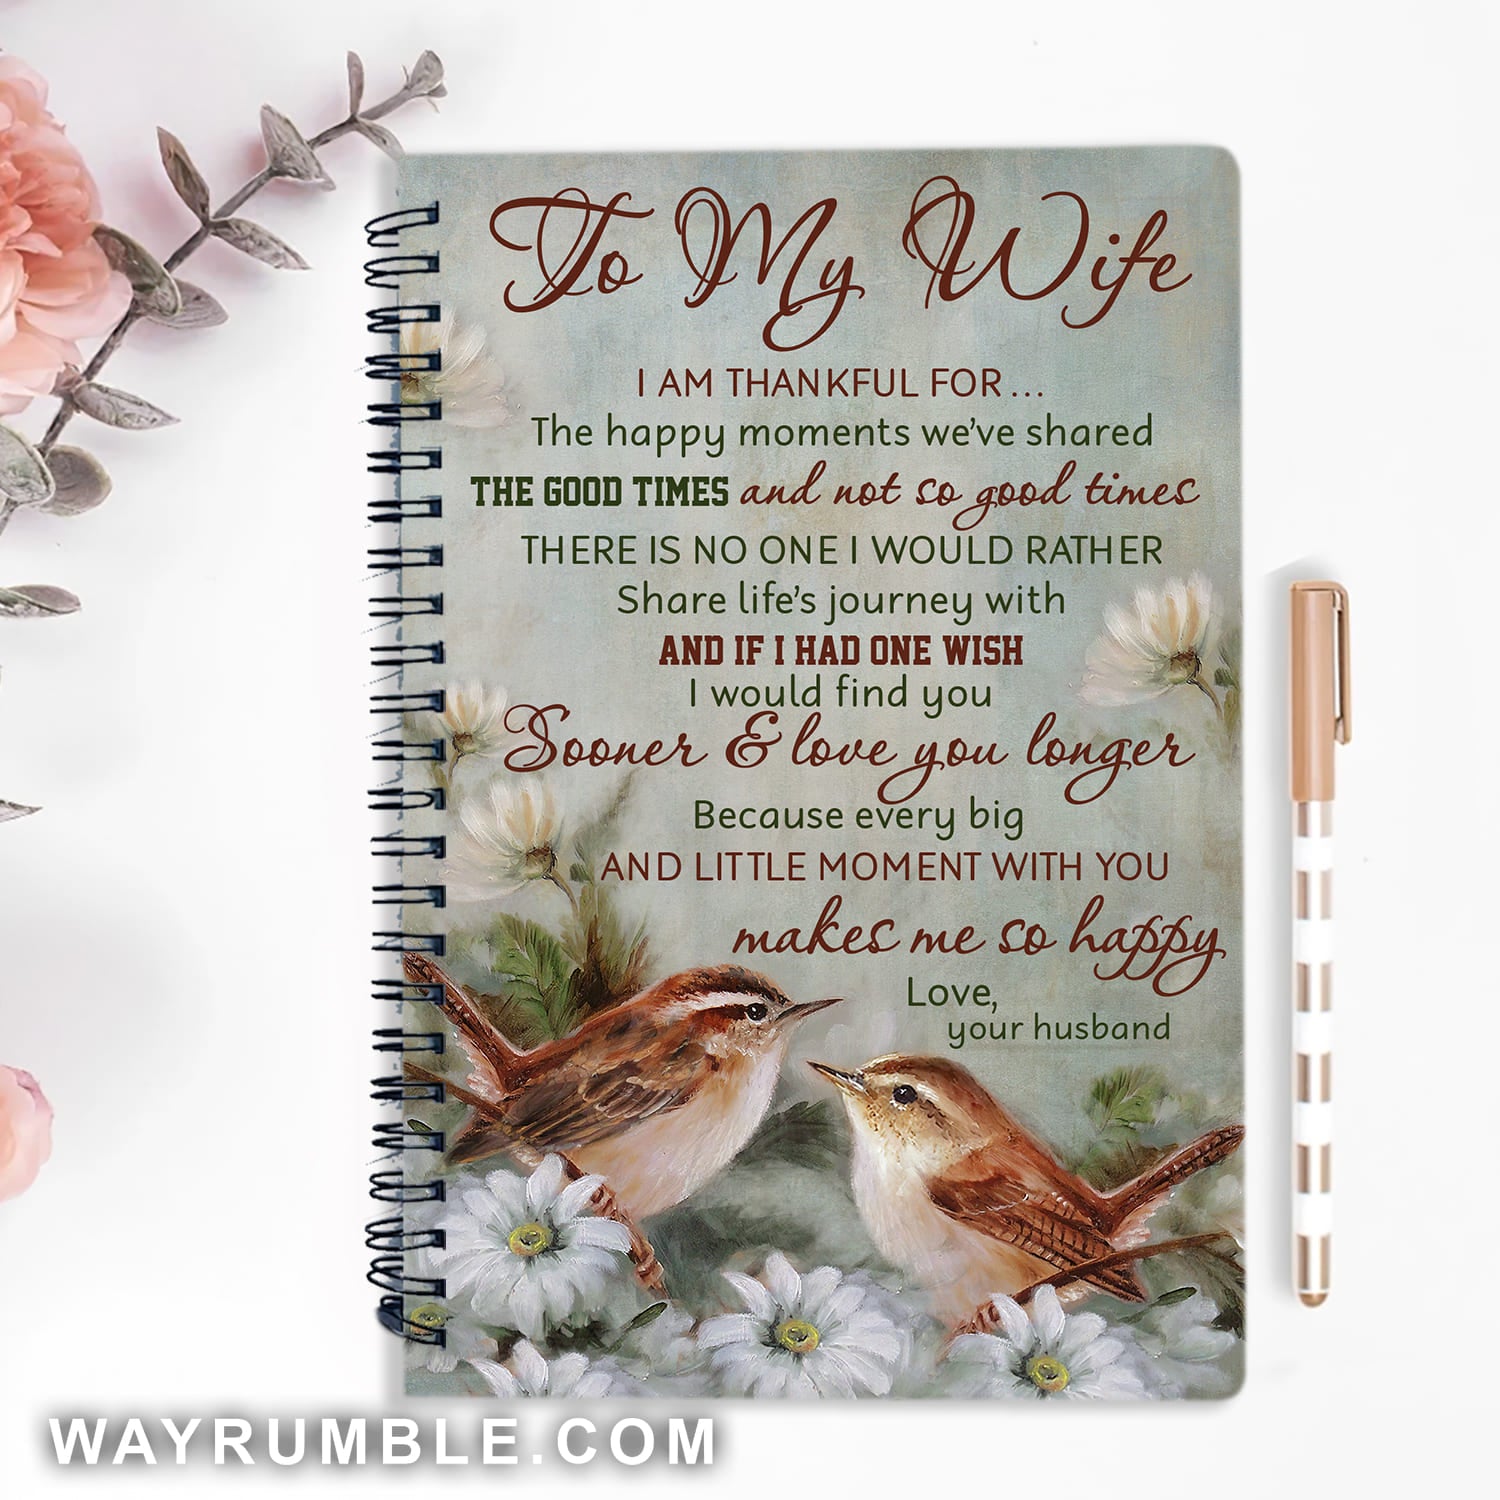 To my wife, Cute bird drawing, Daisy painting, I would find you sooner and love you longer - Couple Spiral Journal